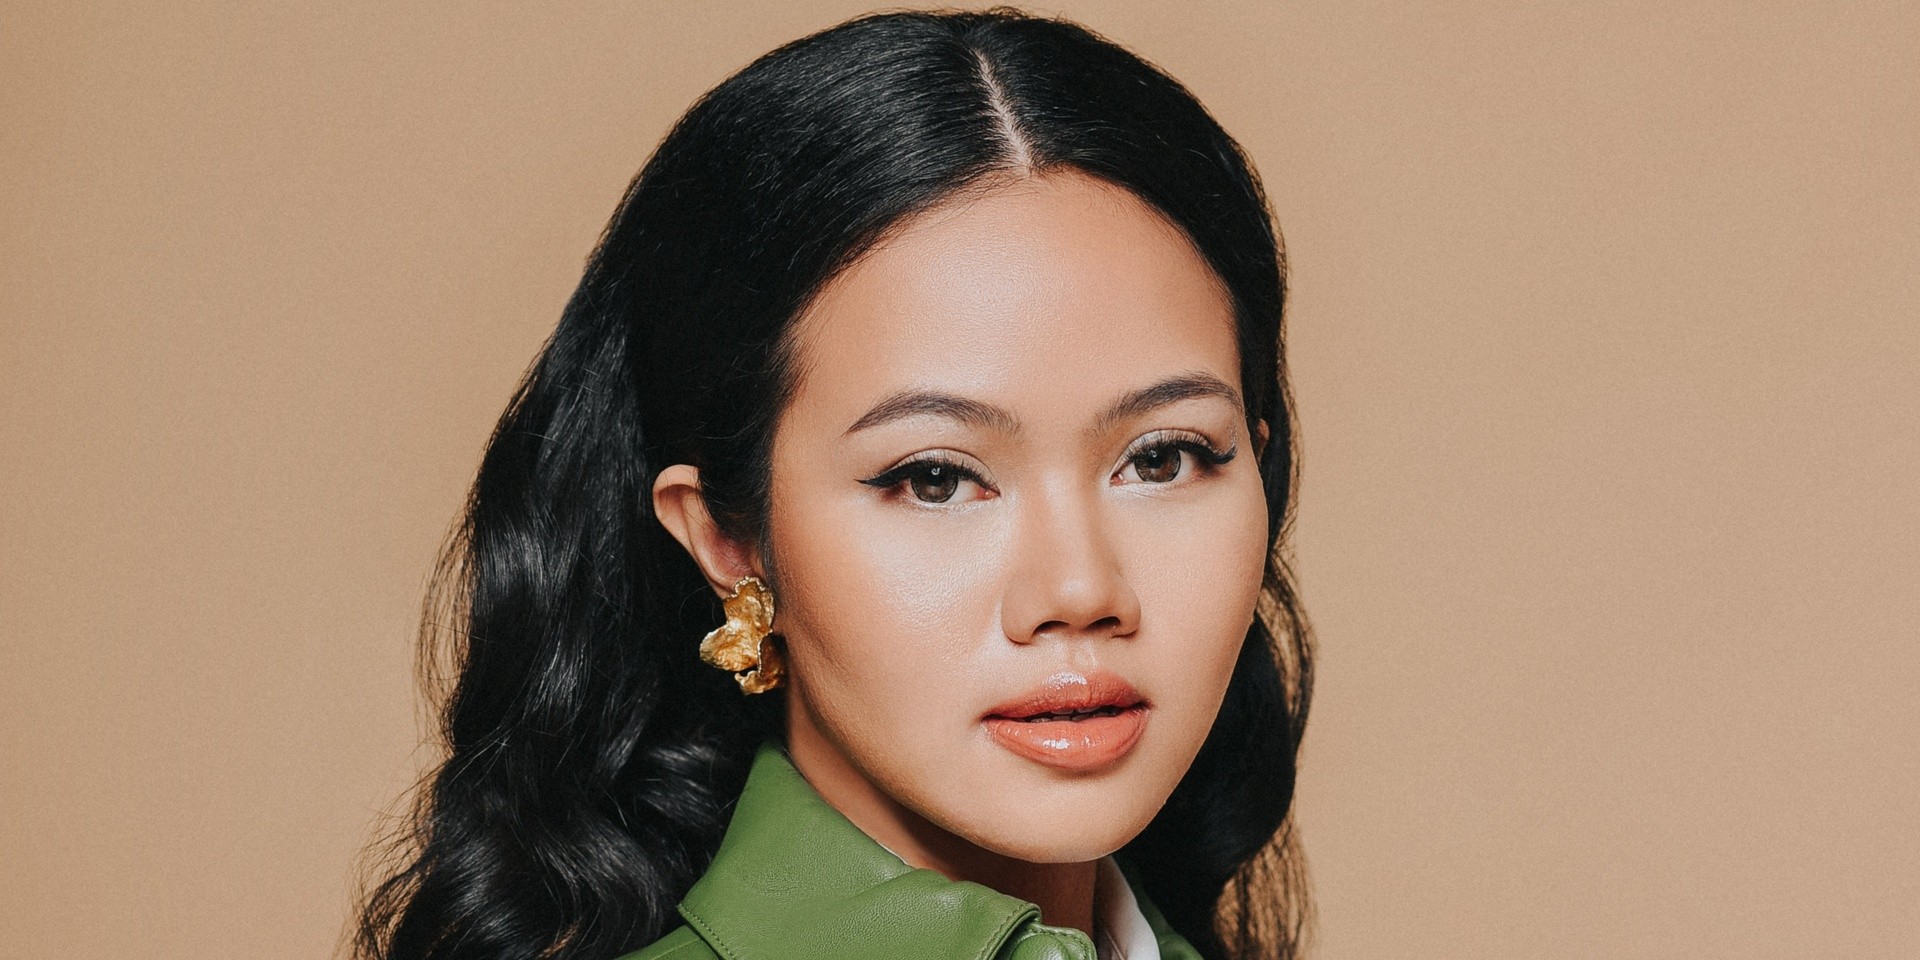 Asia Spotlight: 'Music has the power to remind me of who I truly am' - Yura Yunita on embracing herself and celebrating imperfections